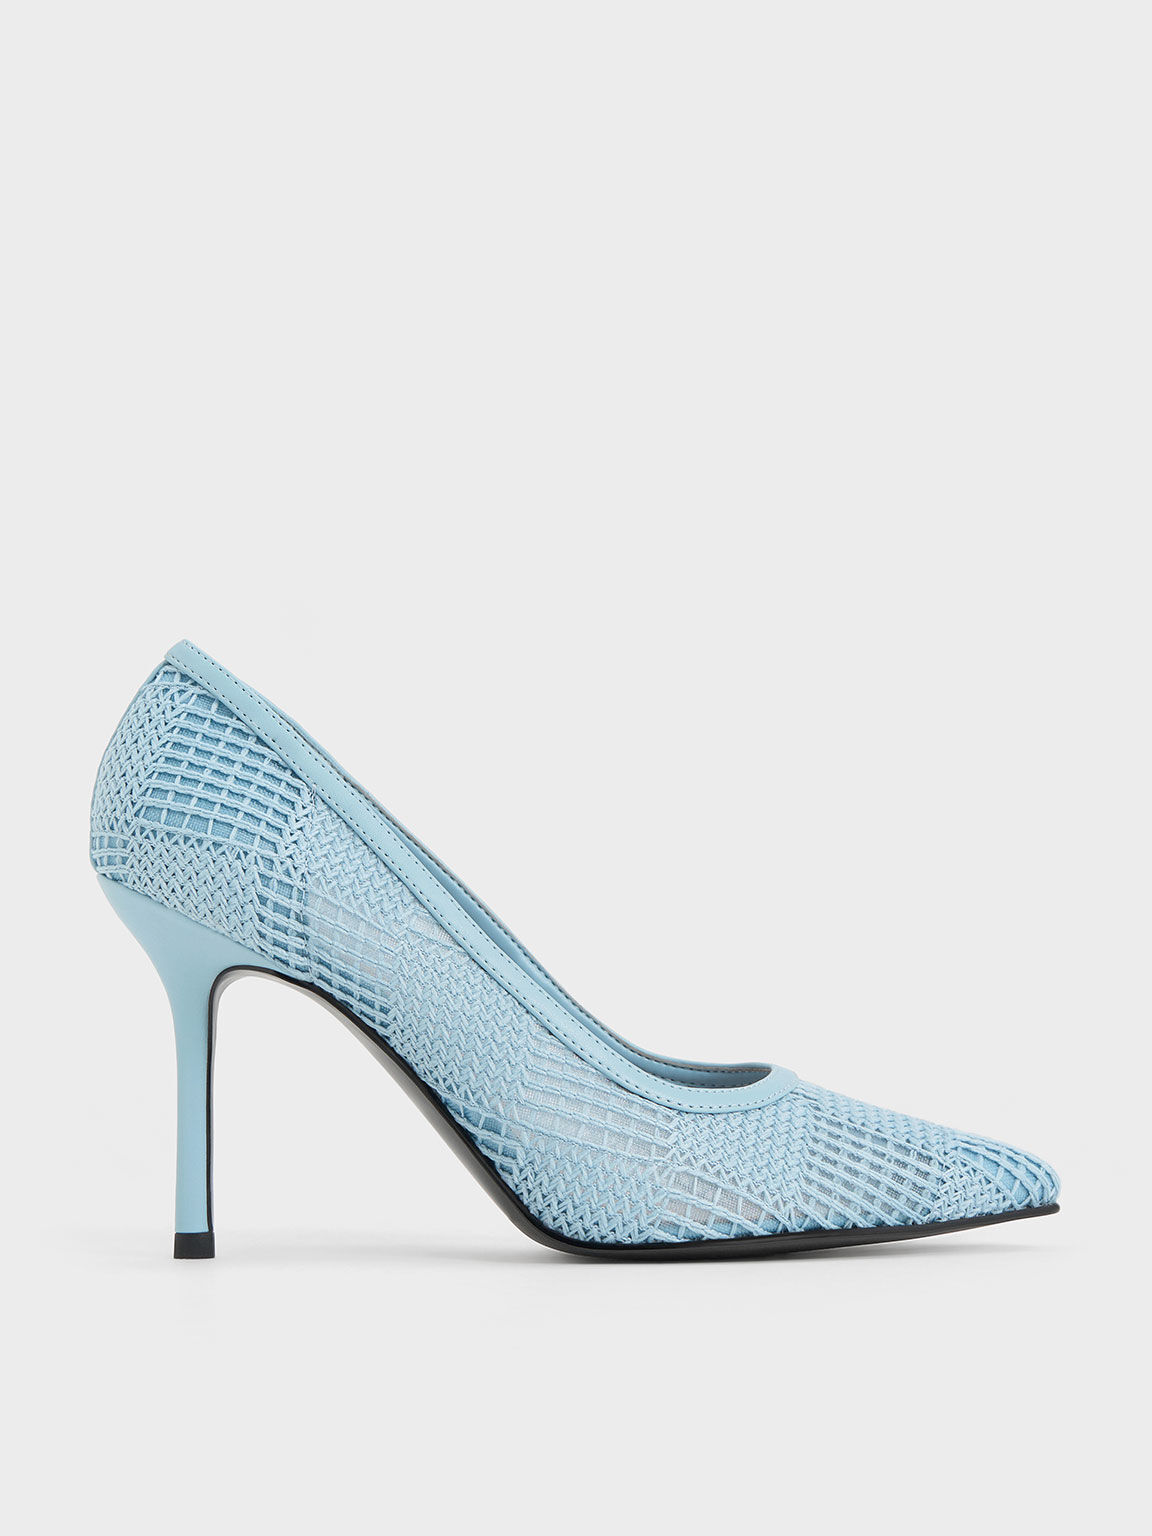 Women's Shoes | Shop Exclusive Styles | CHARLES & KEITH International